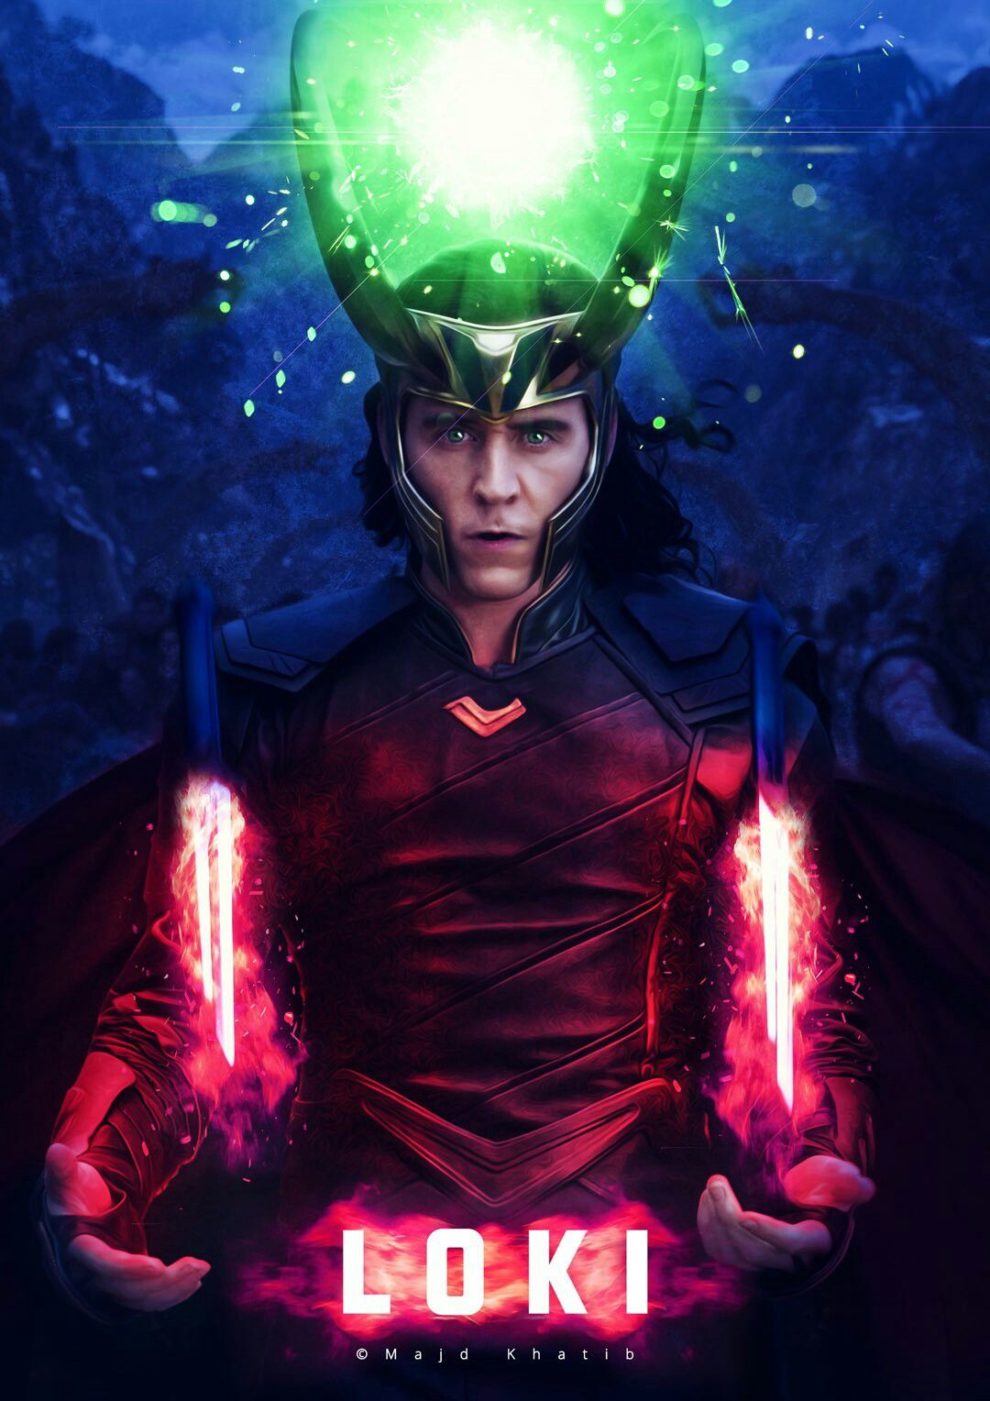 Best Loki Wallpapers For iPhone In HD/4K from The Series